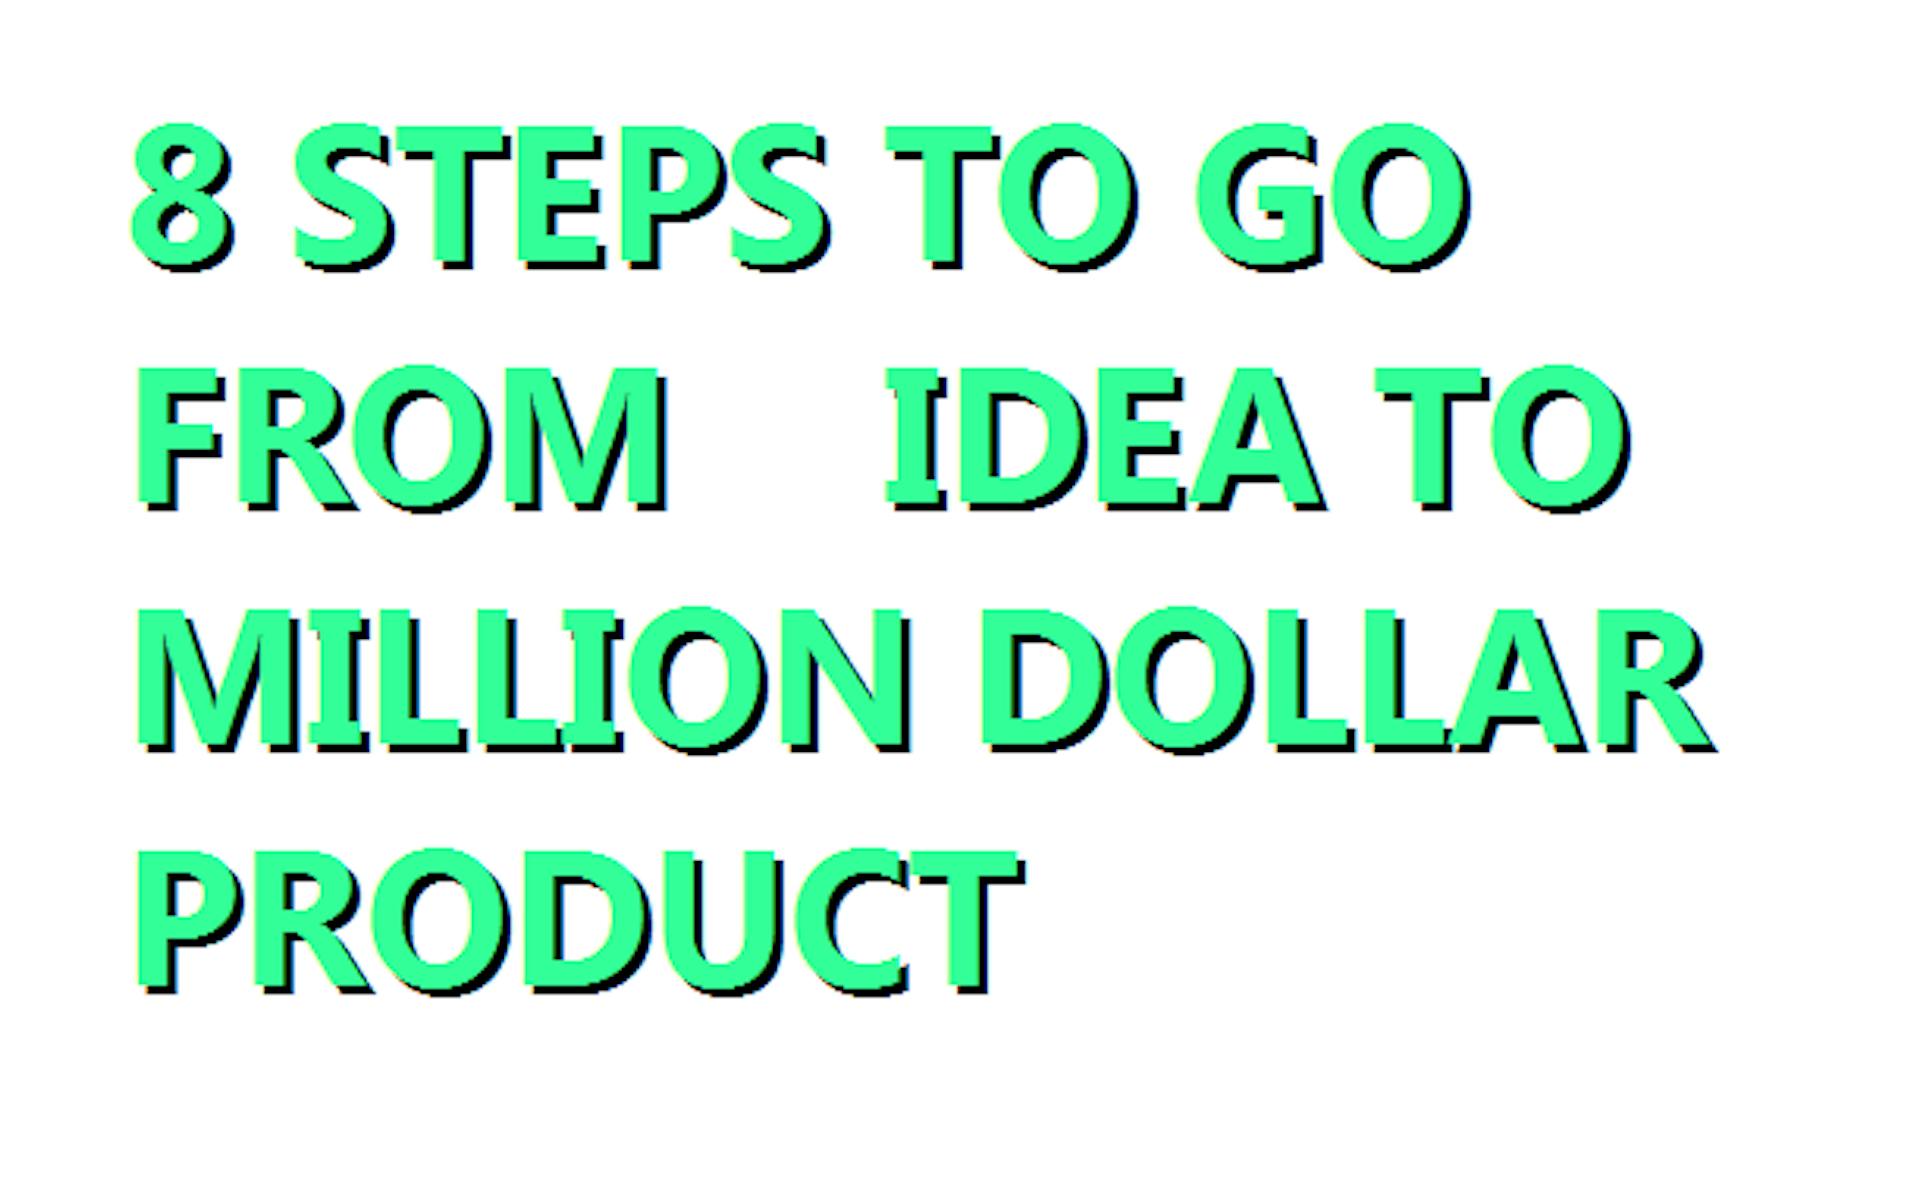 featured image - 8 Steps to go from idea to a million dollar product.